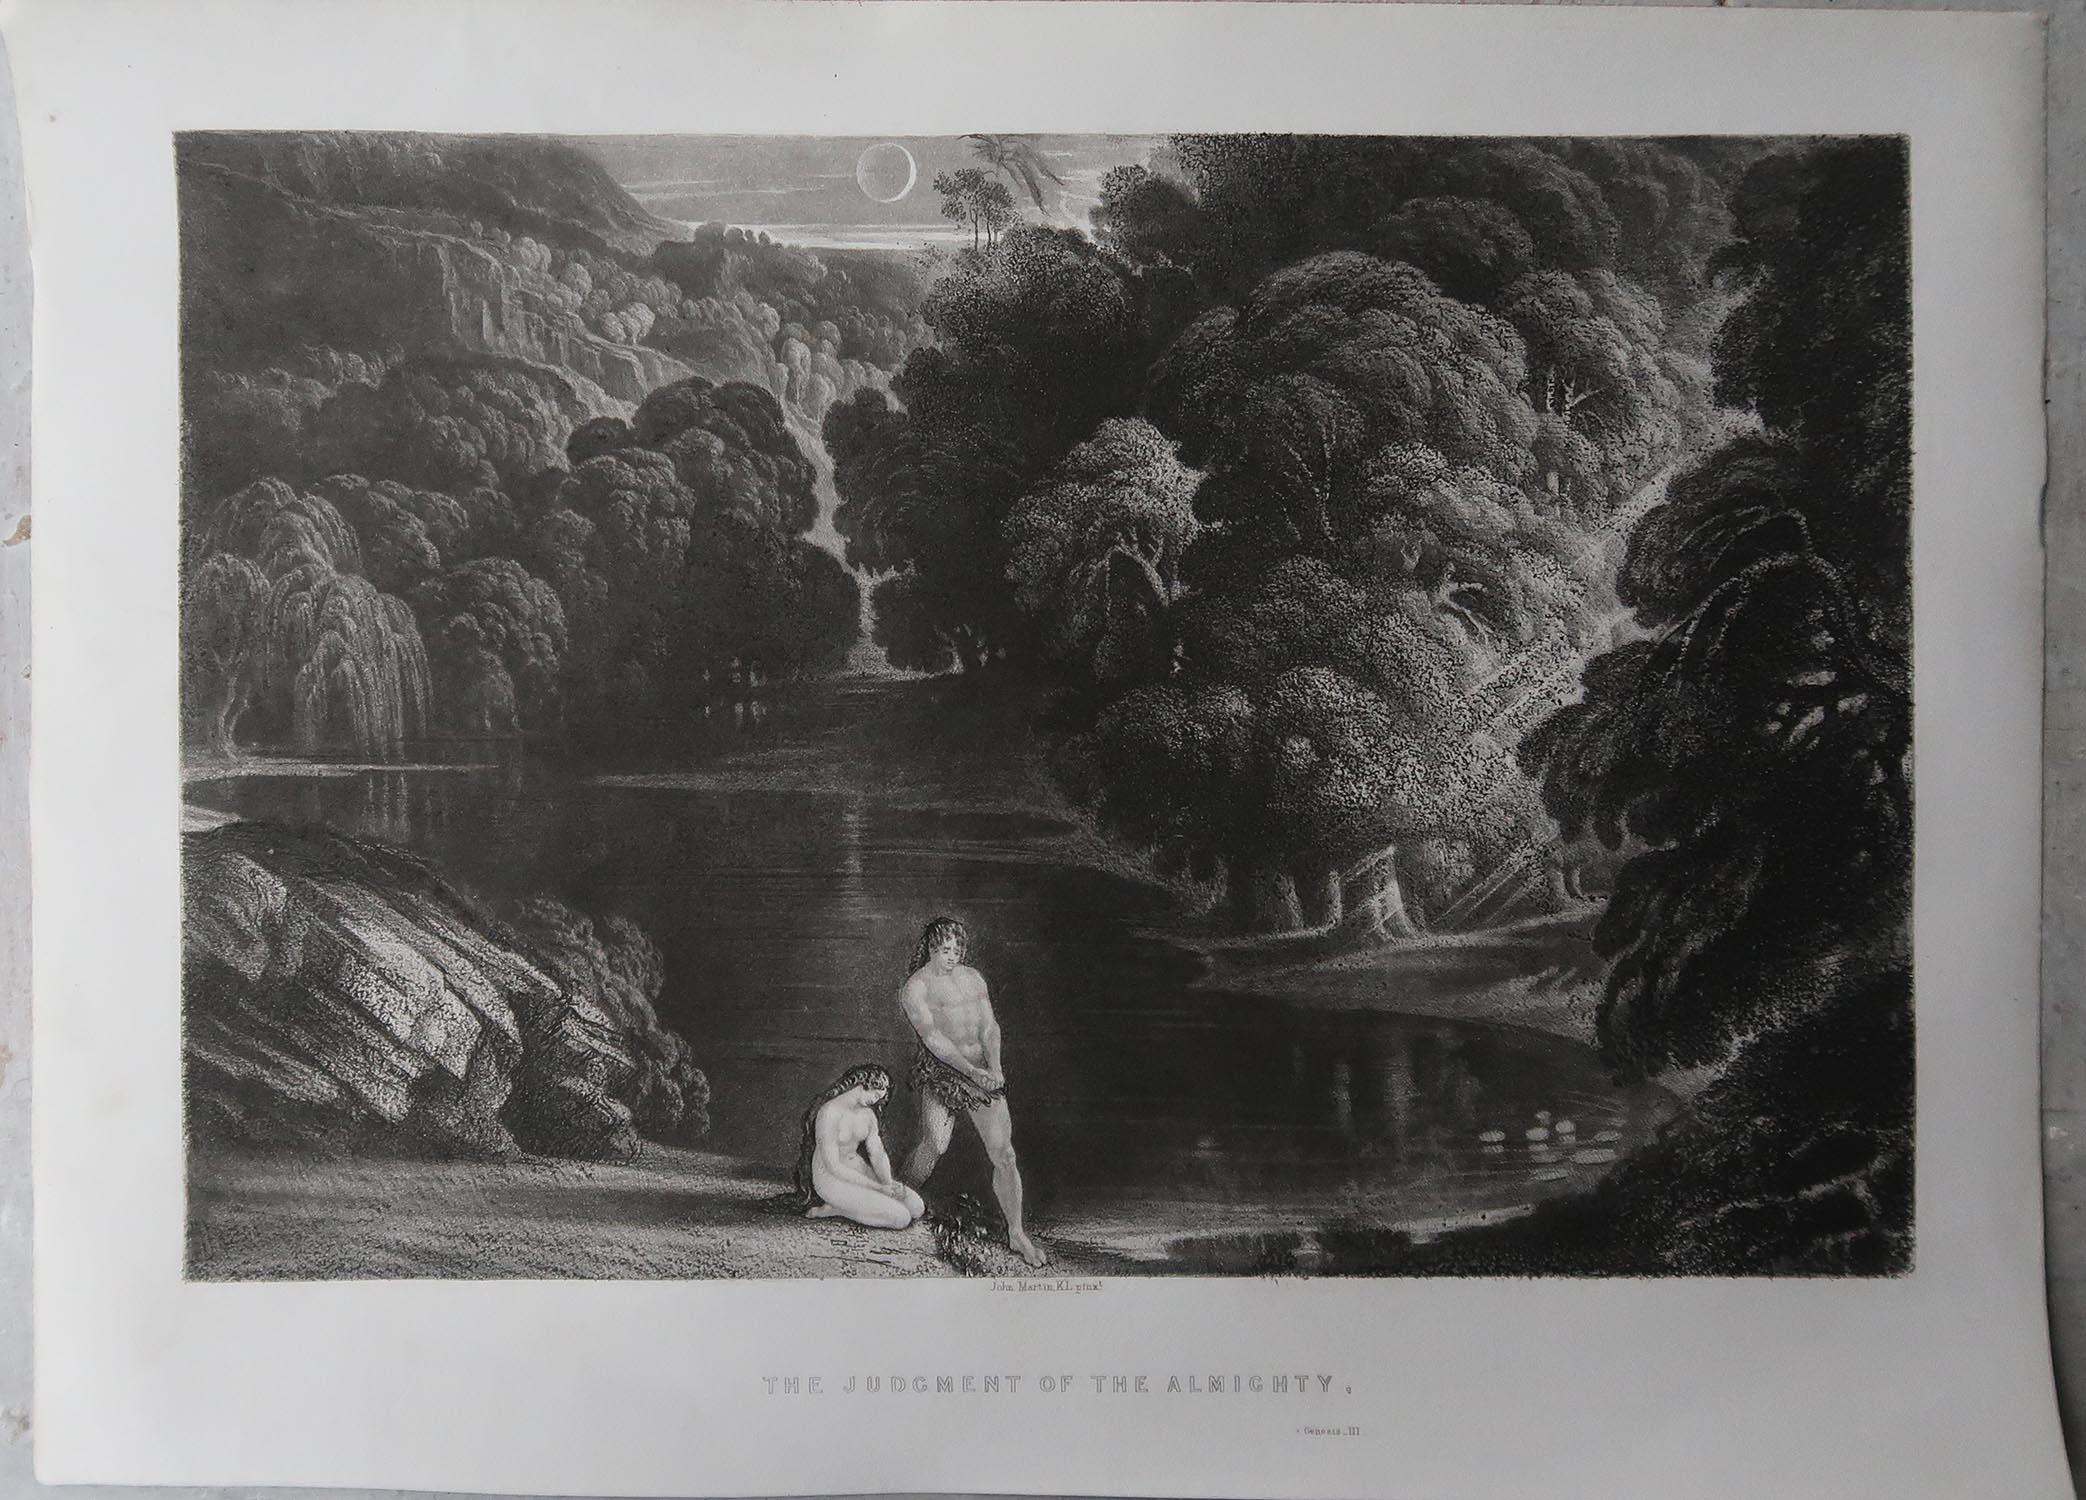 Romantic Mezzotint by John Martin, the Judgment of the Almighty, Sangster, C.1850